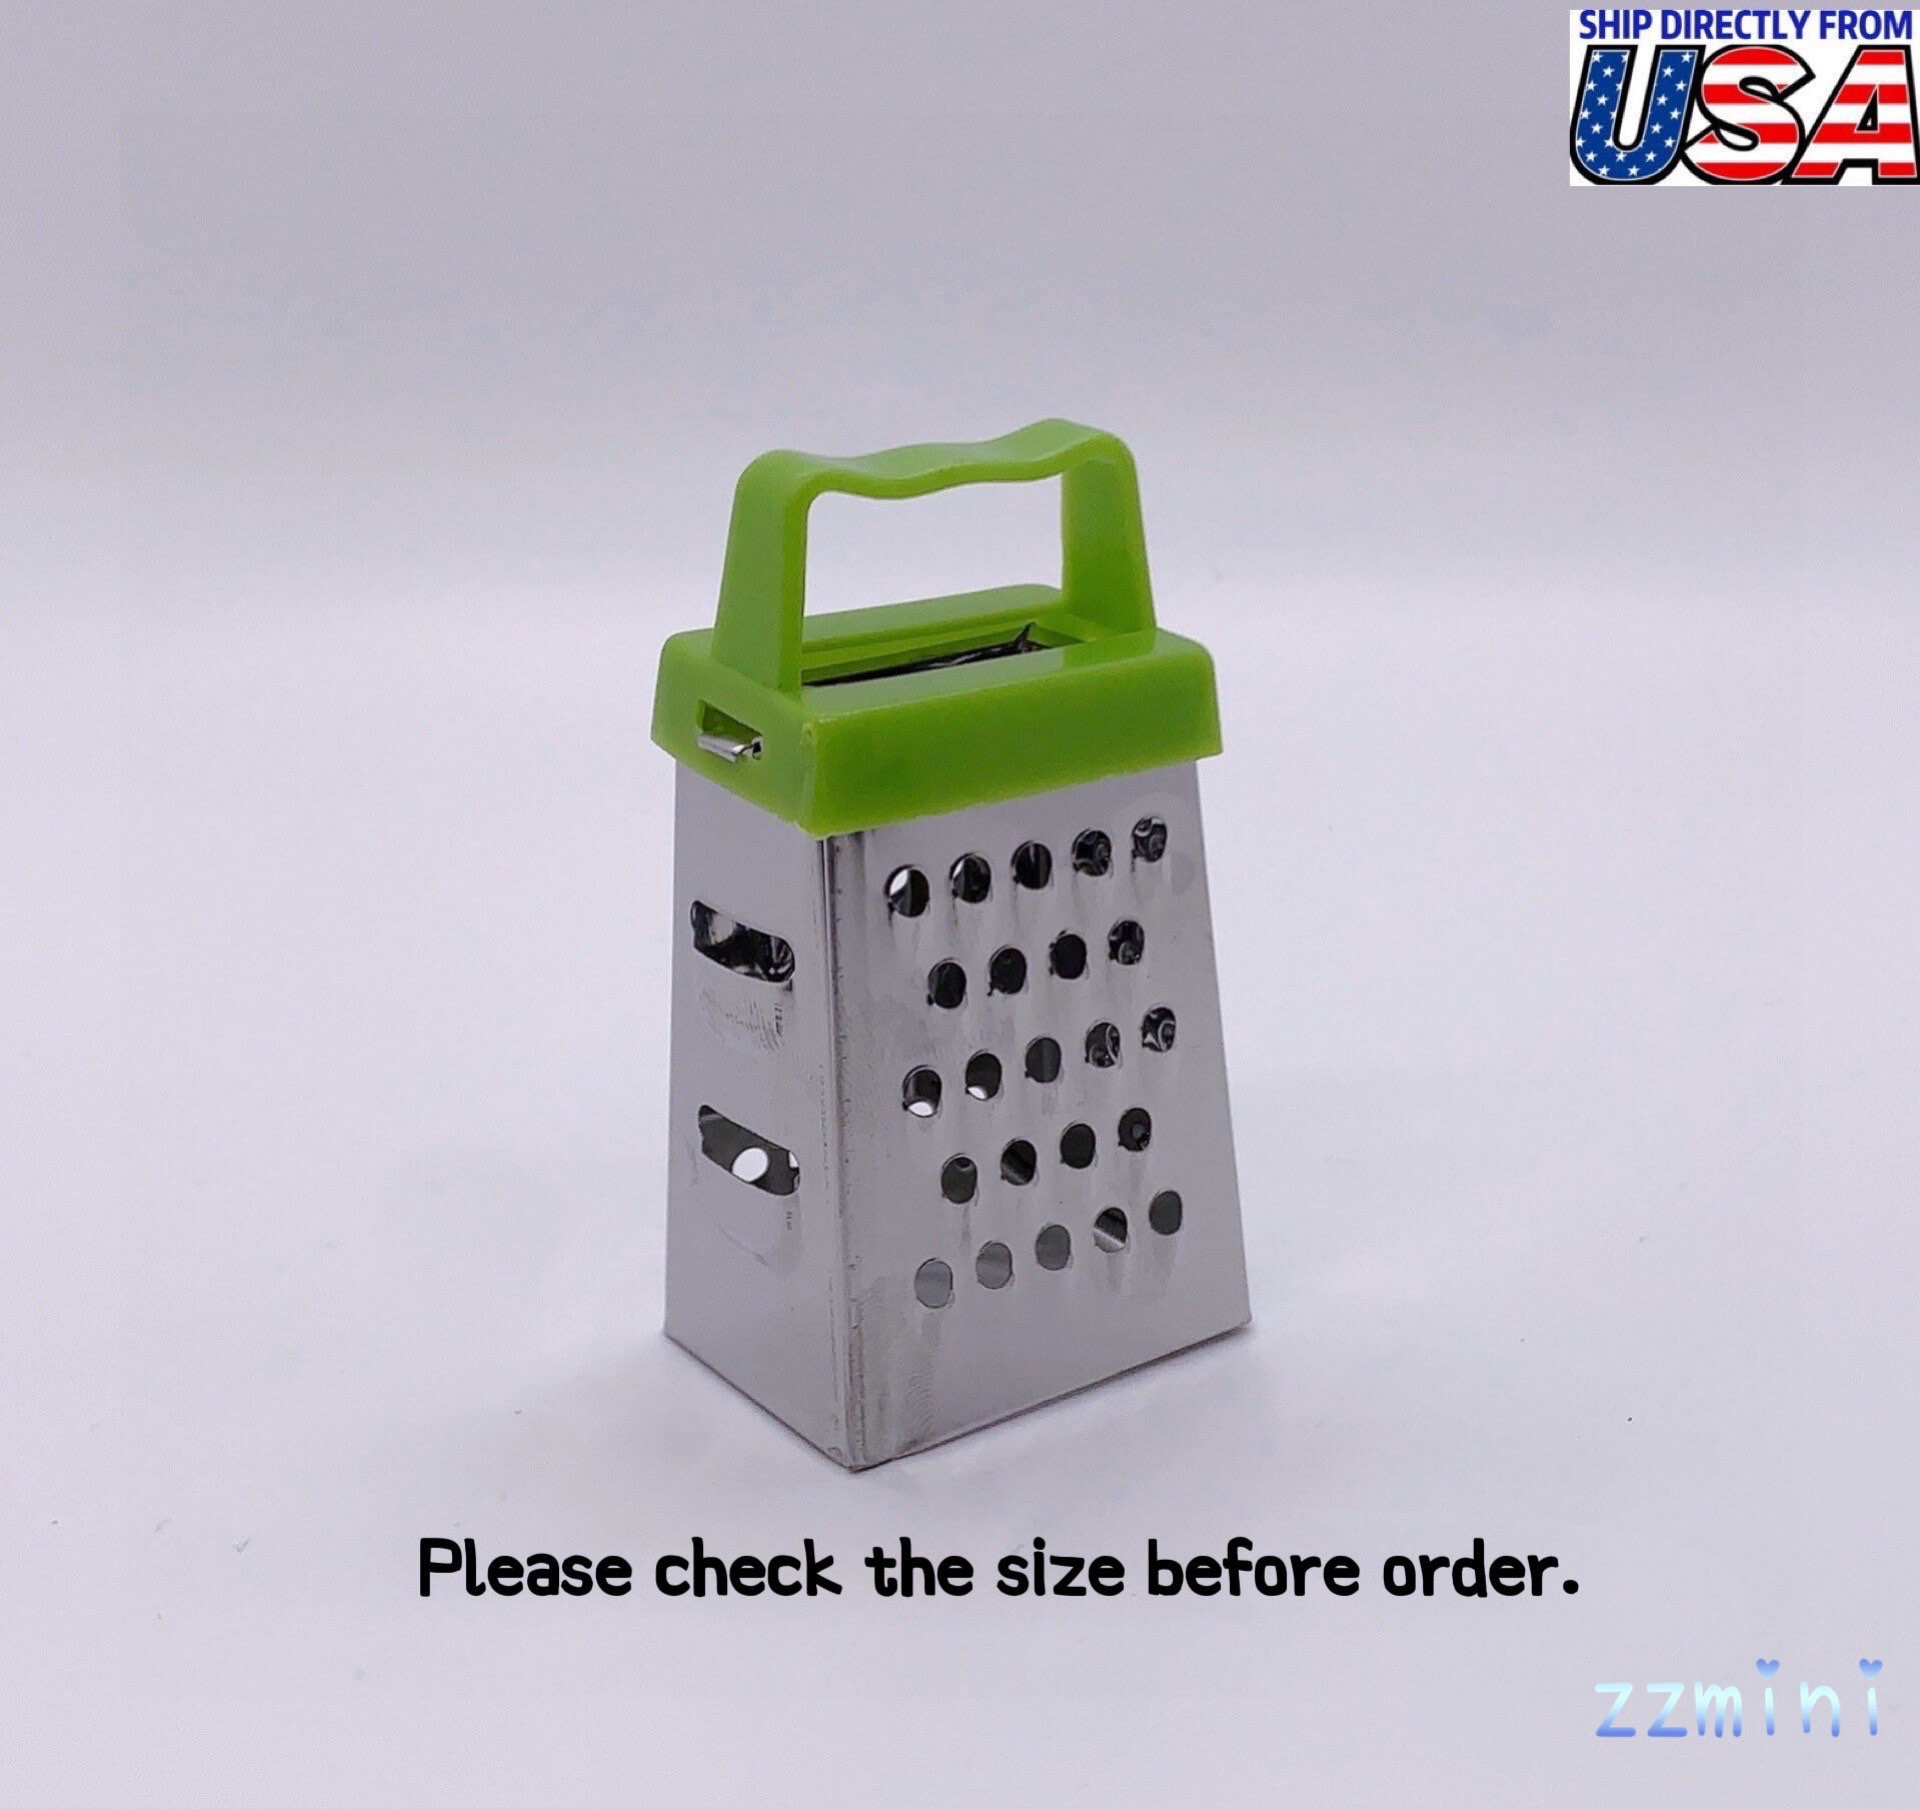 Handy Housewares Mini Grater with Container - Ideal for Grating Garlic, Cheese and Zesting Citrus - Random Color